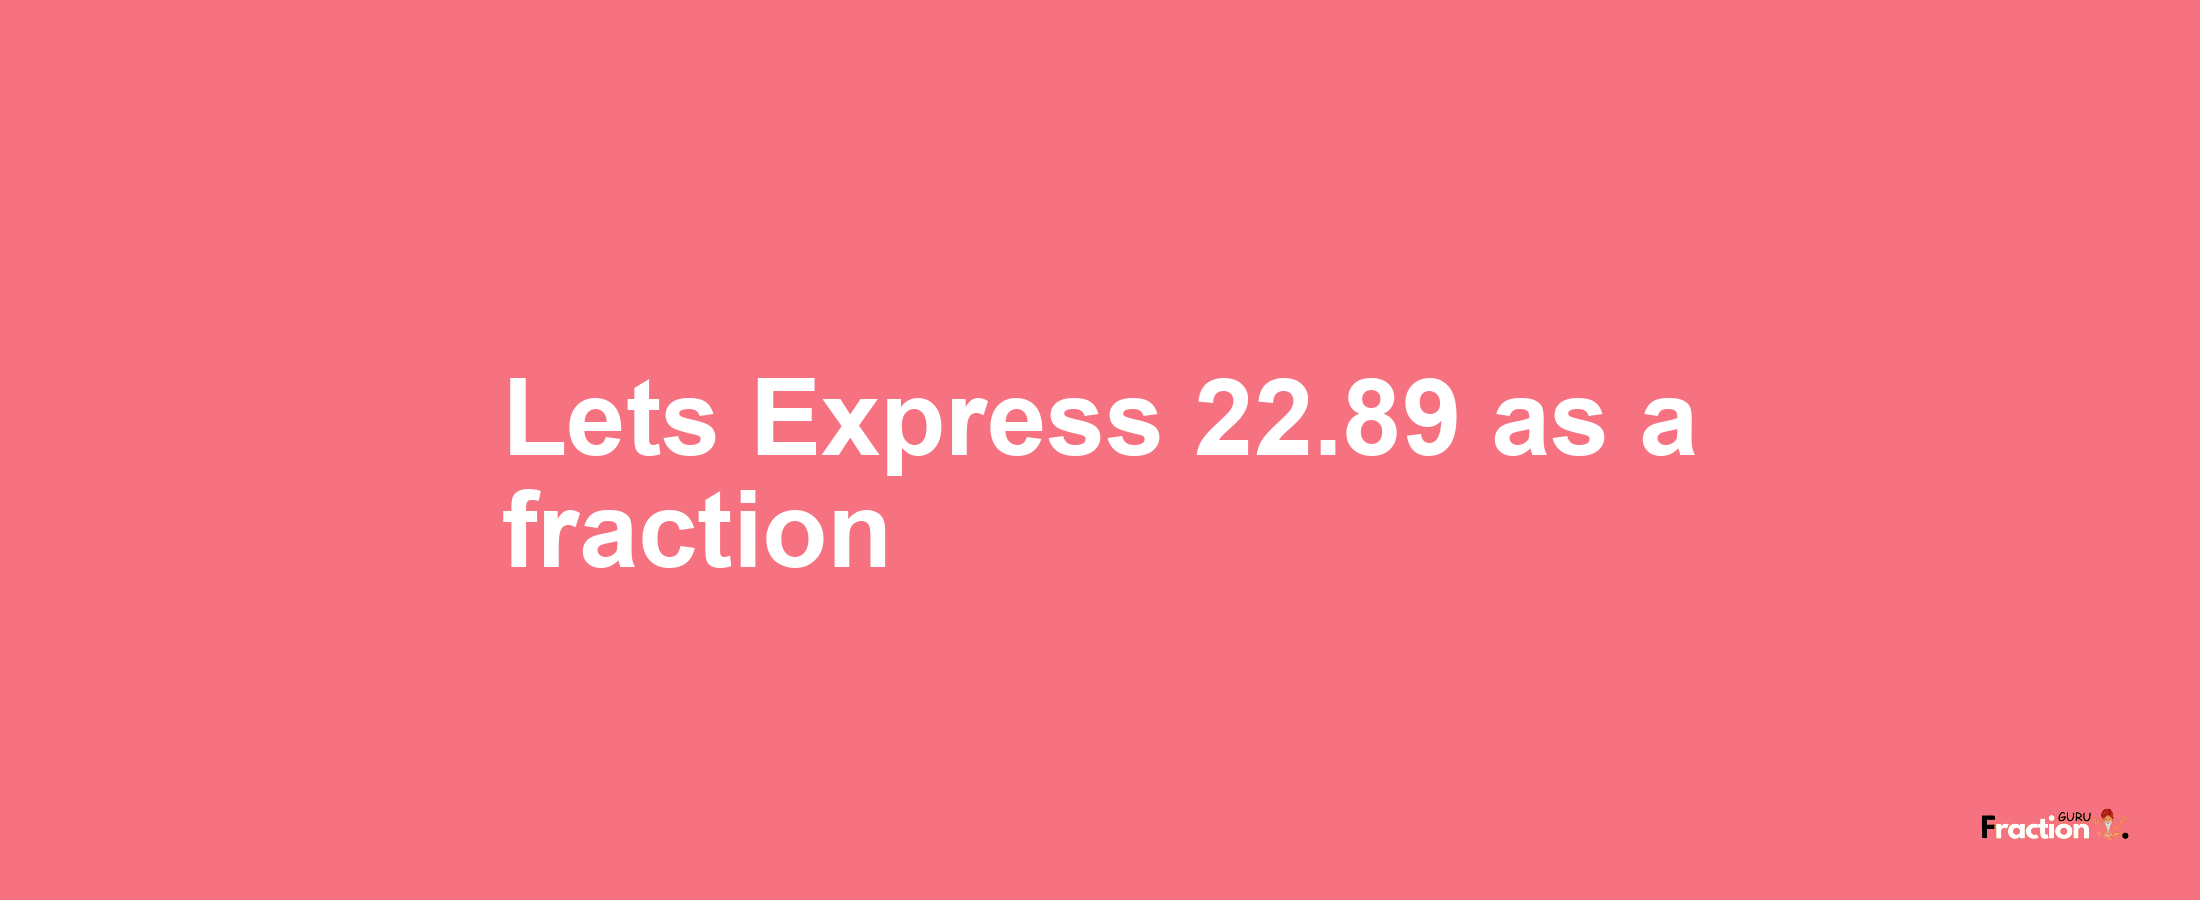 Lets Express 22.89 as afraction